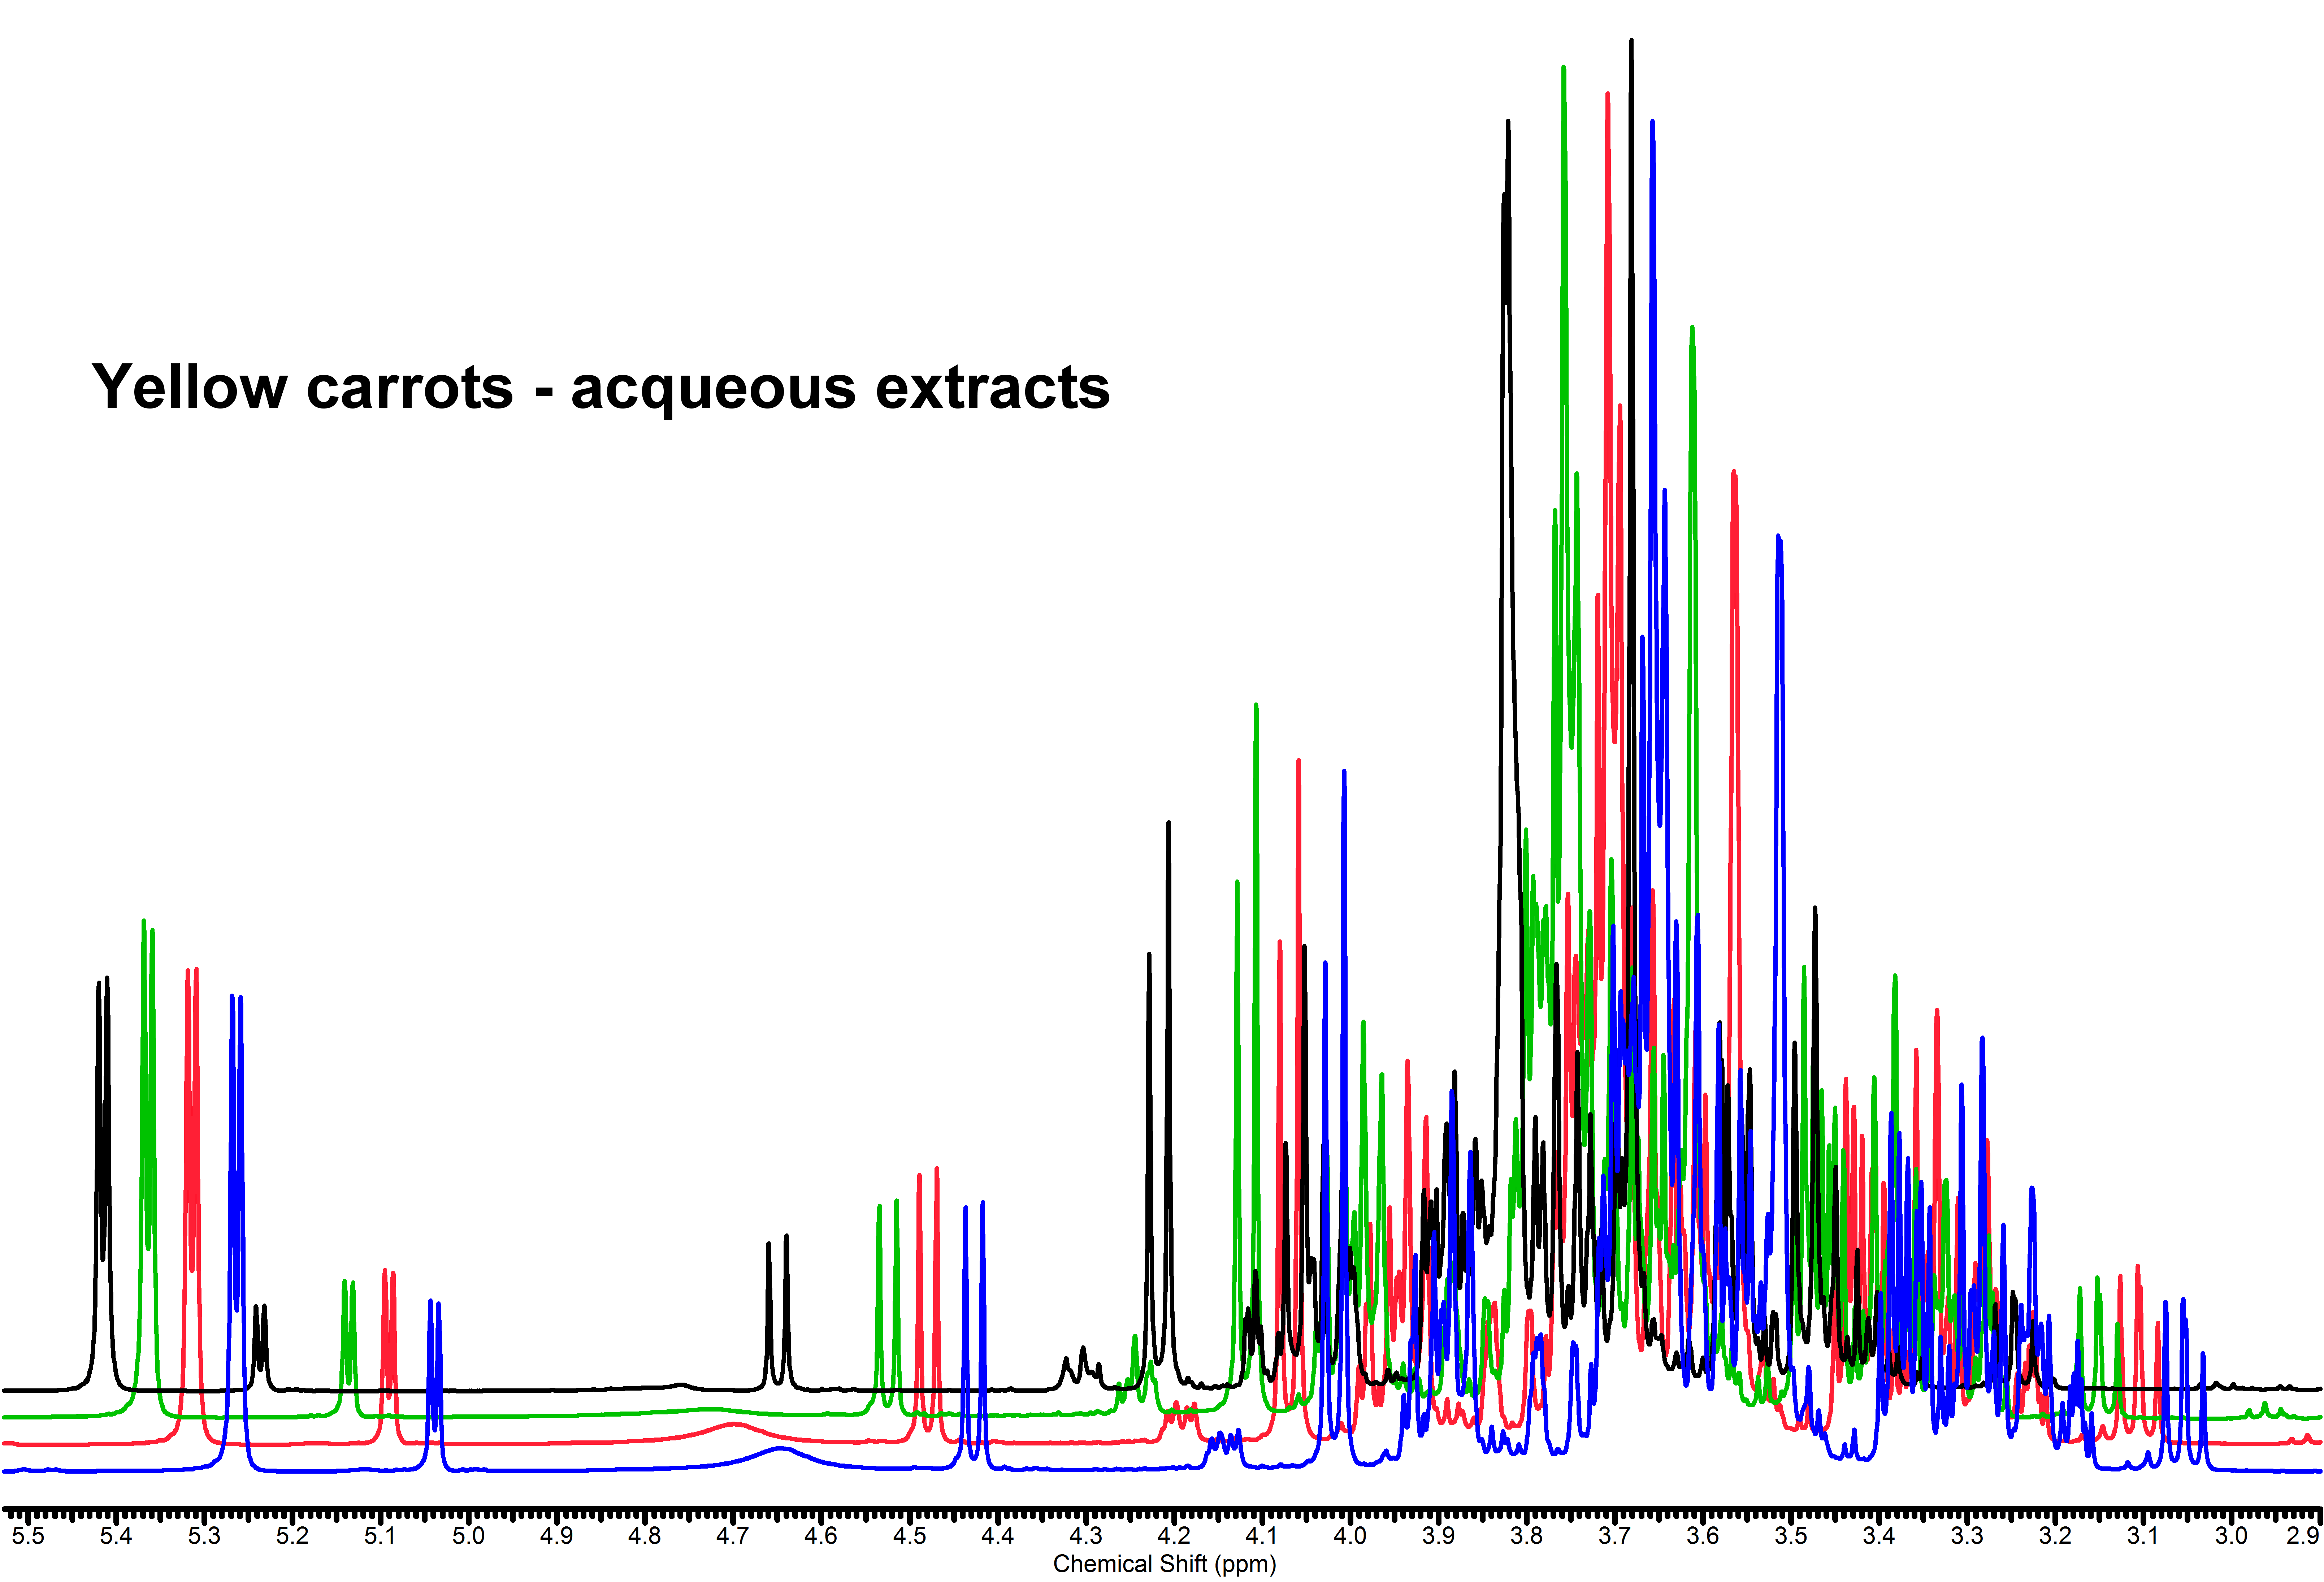 H-1 NMR spectra of carrot extracts